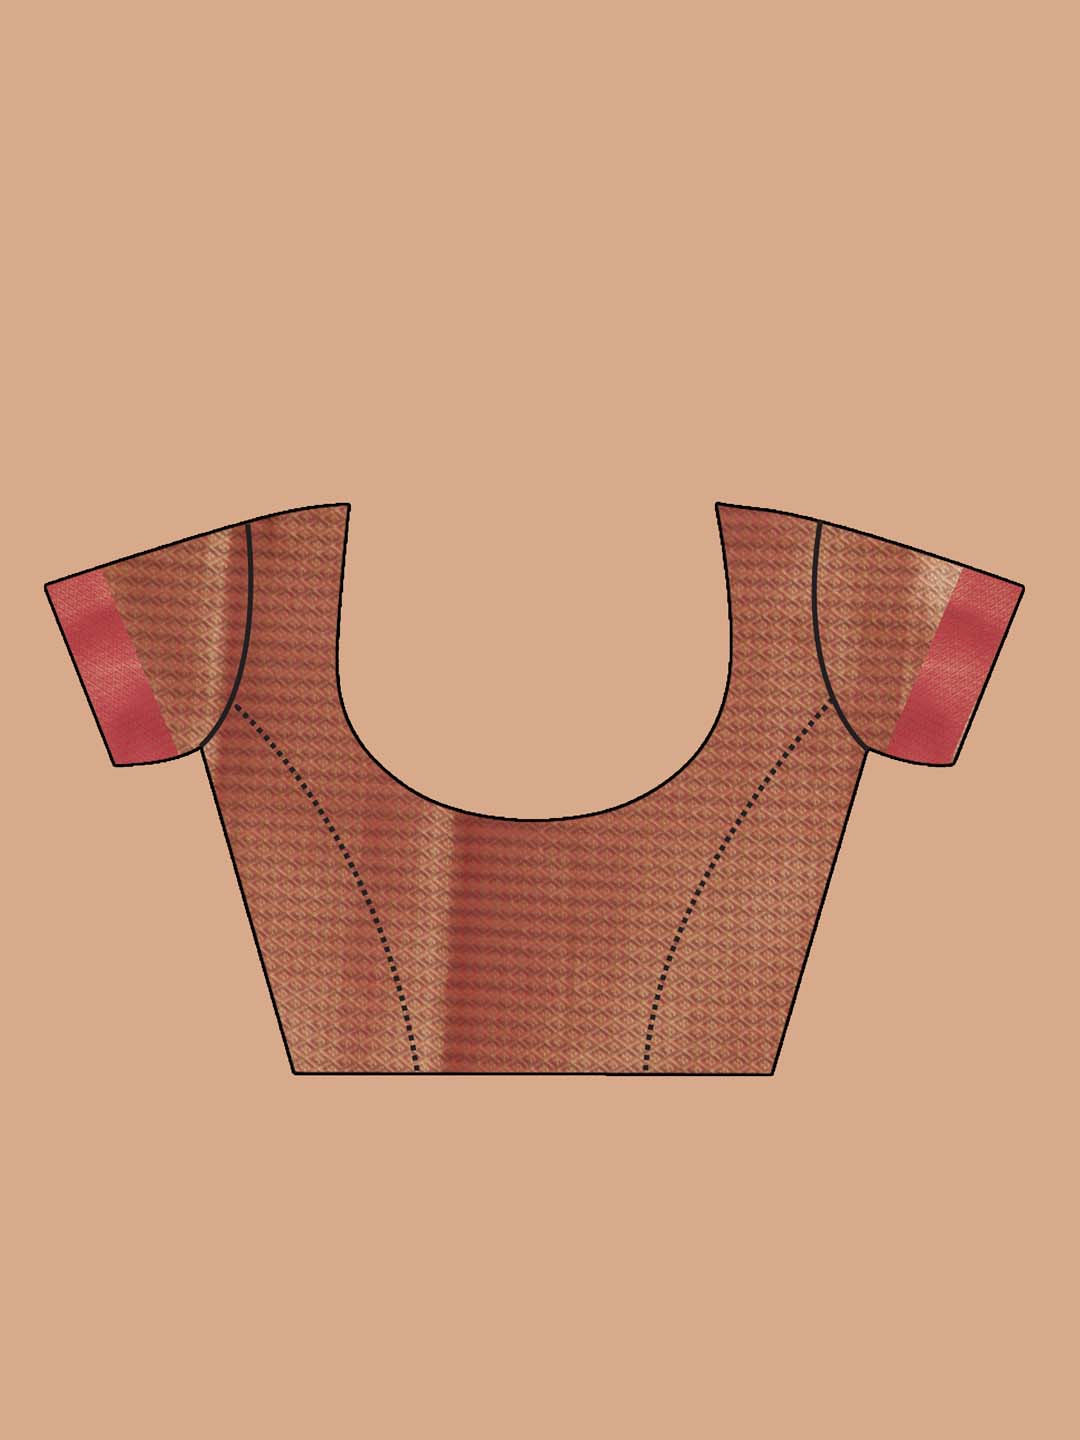 Indethnic Banarasi Peach Checked Daily Wear Saree - Blouse Piece View